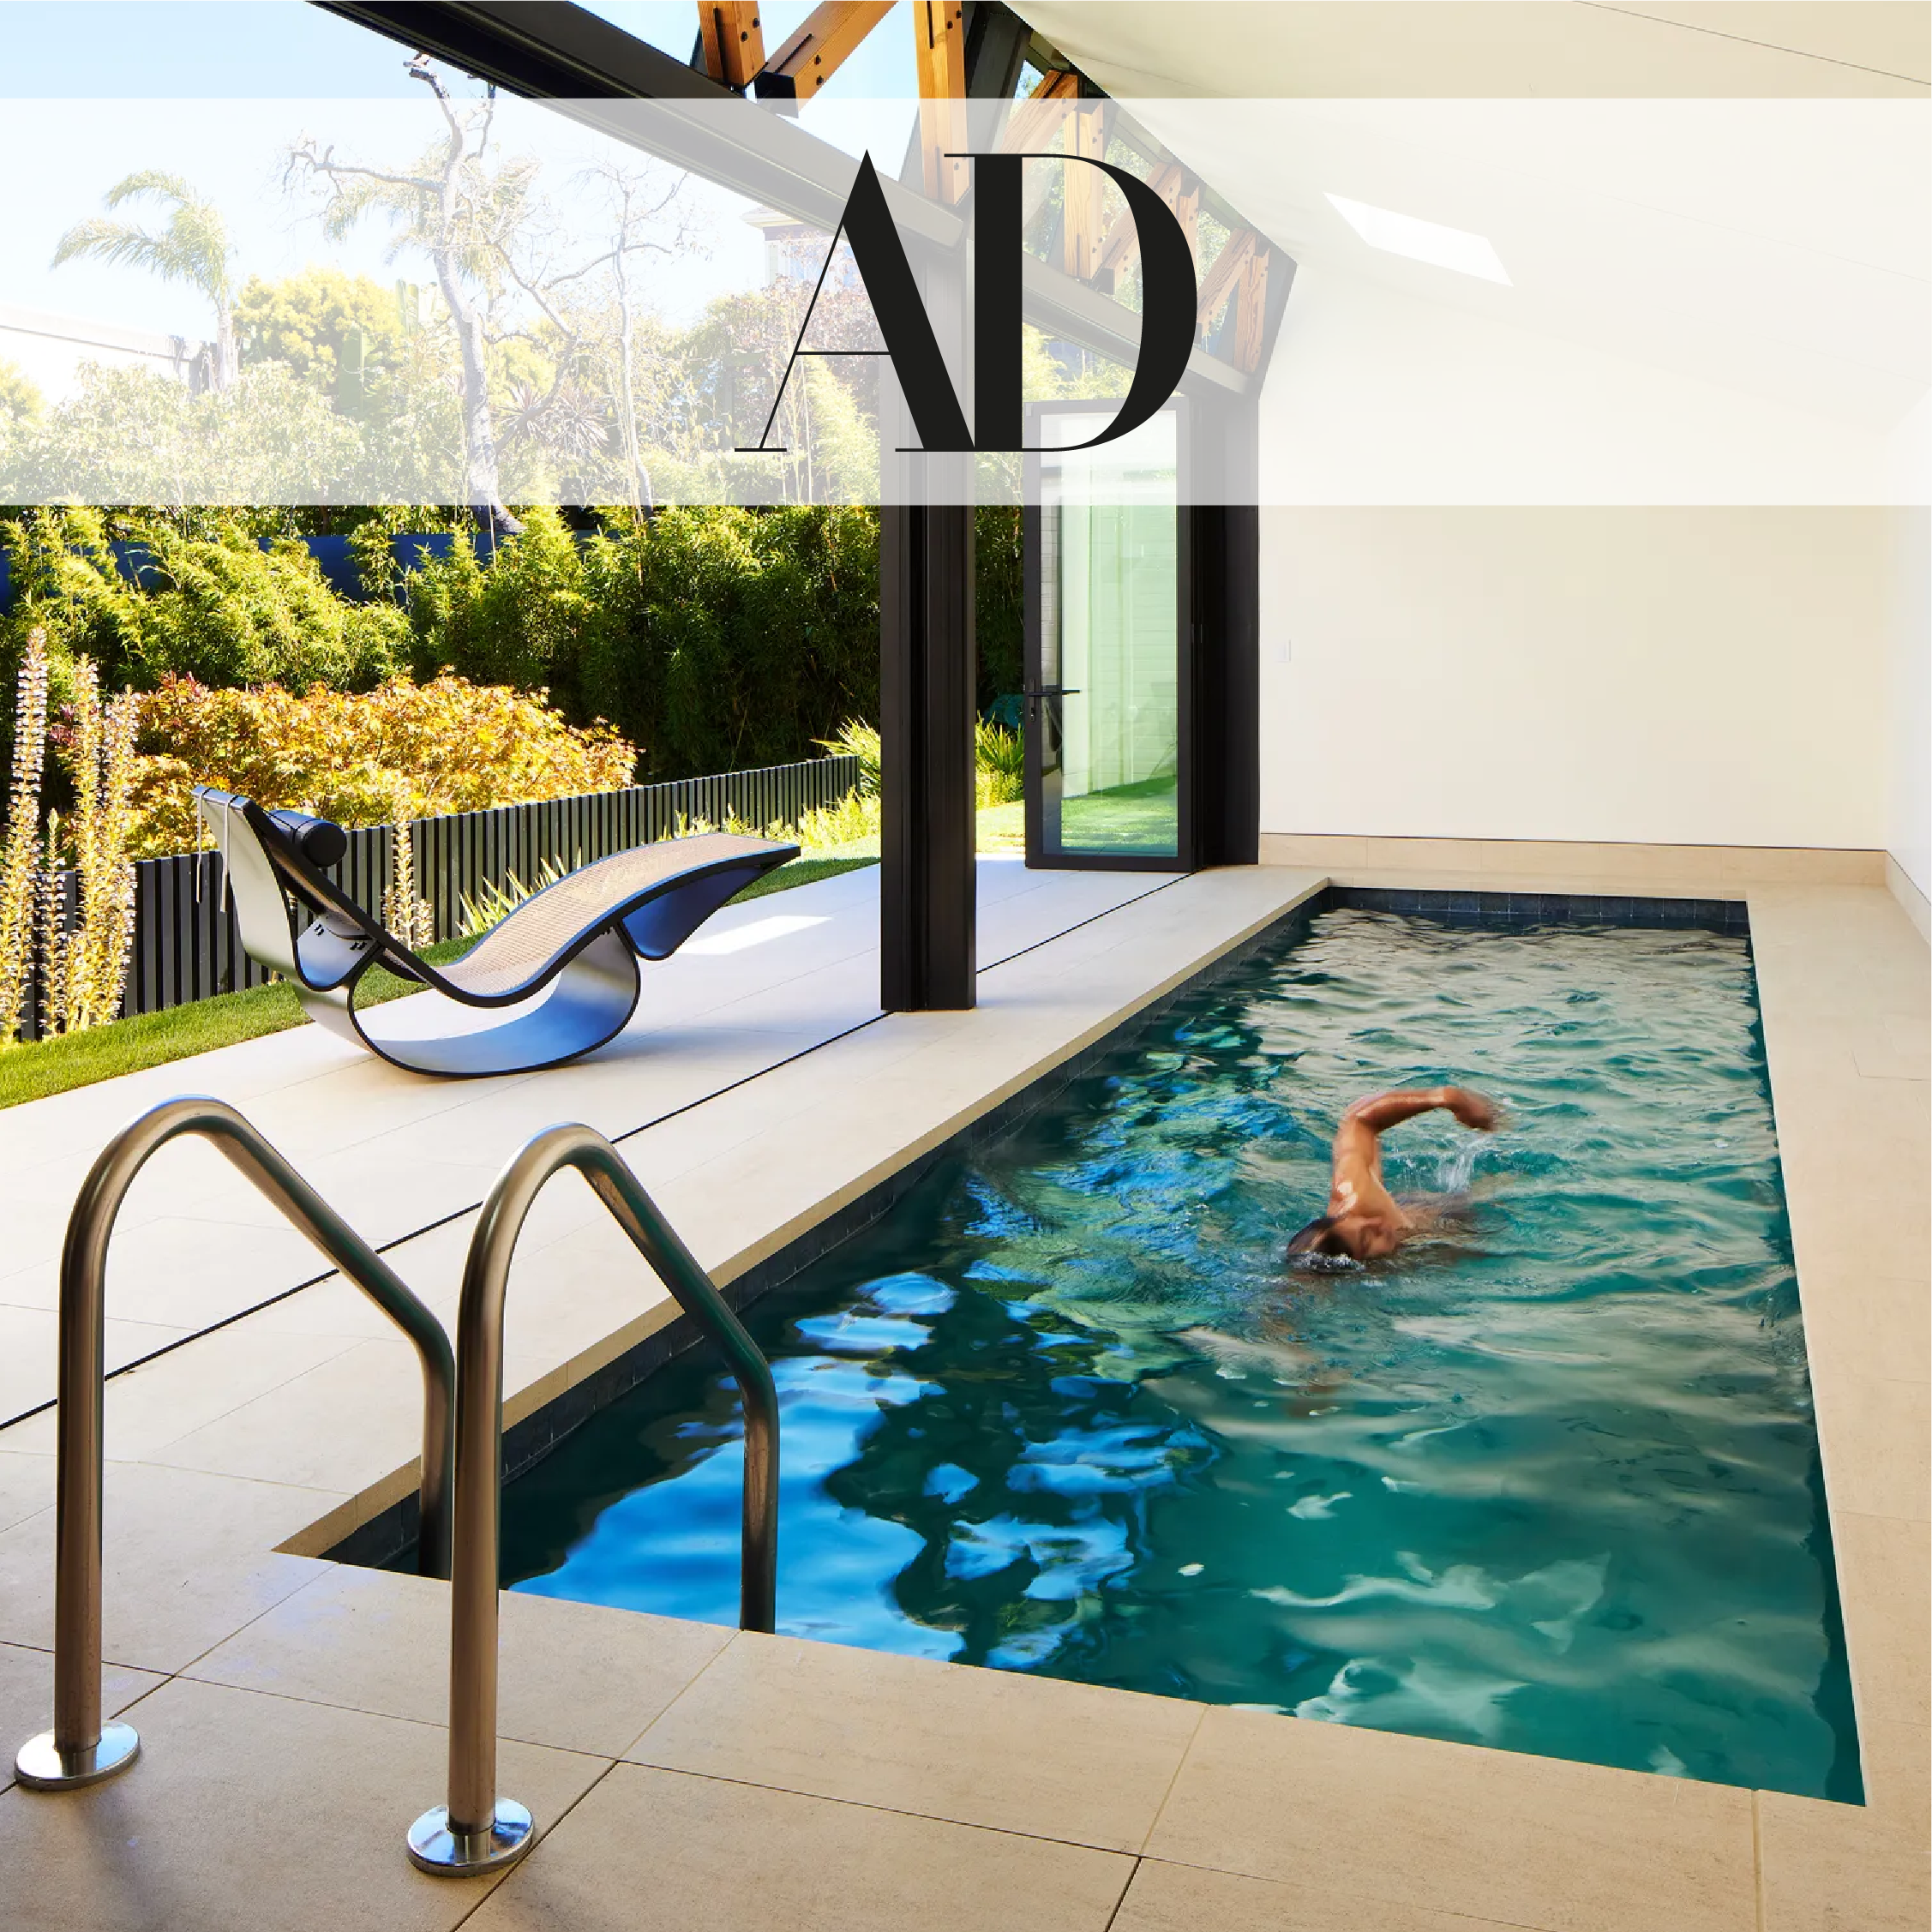 Architectural Digest pool building